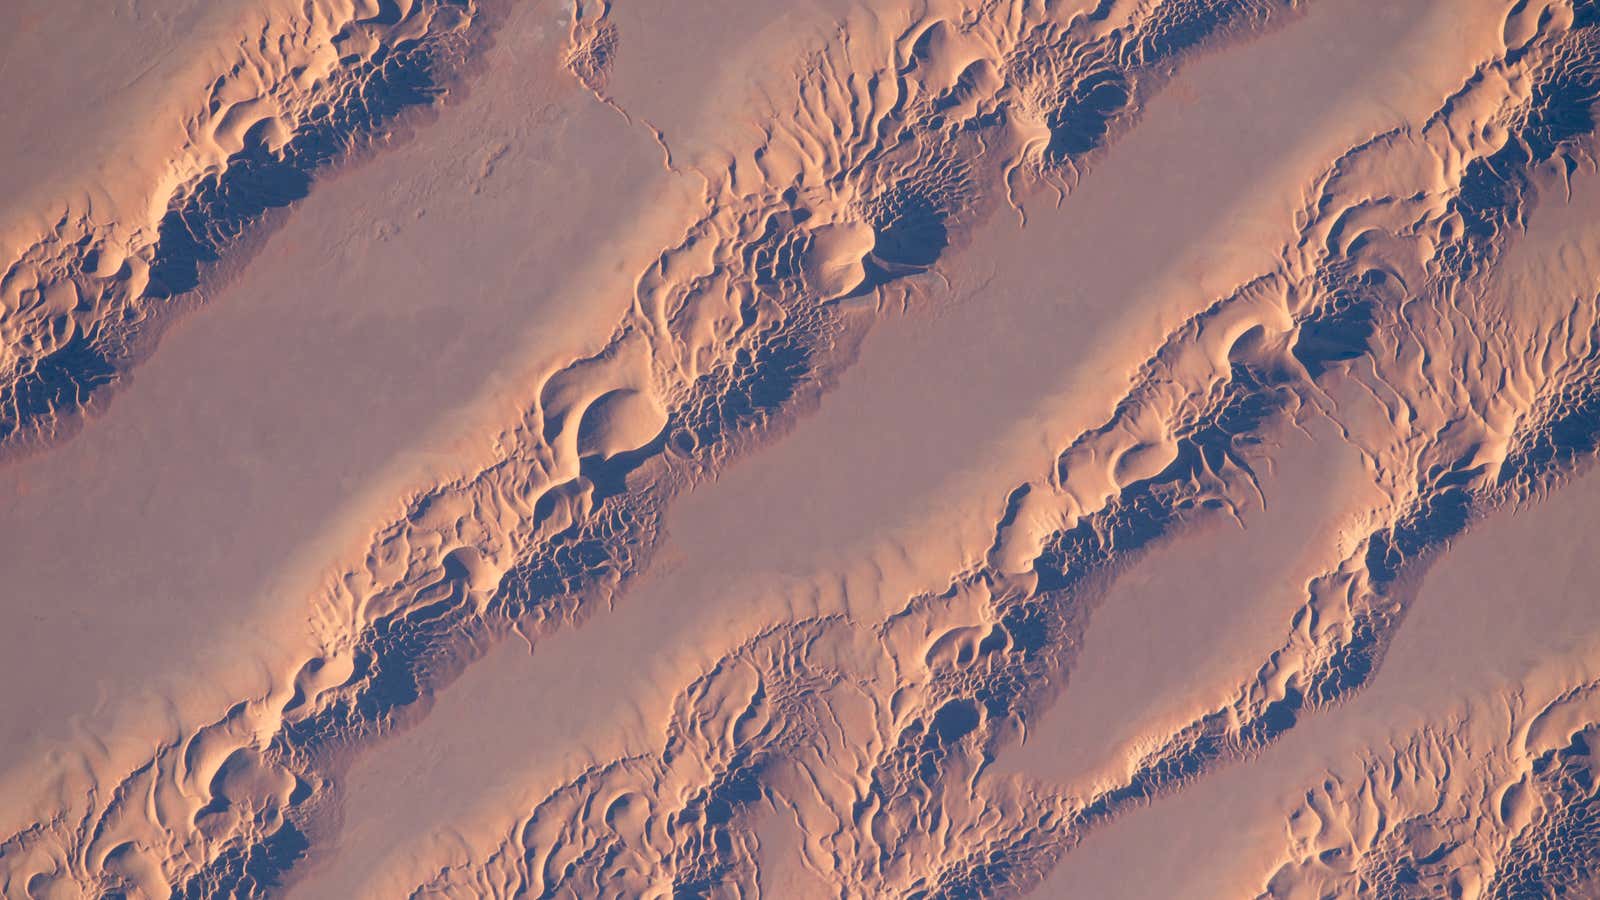 The Grand Erg Oriental dune field in the Sahara Desert seen from the International Space Station